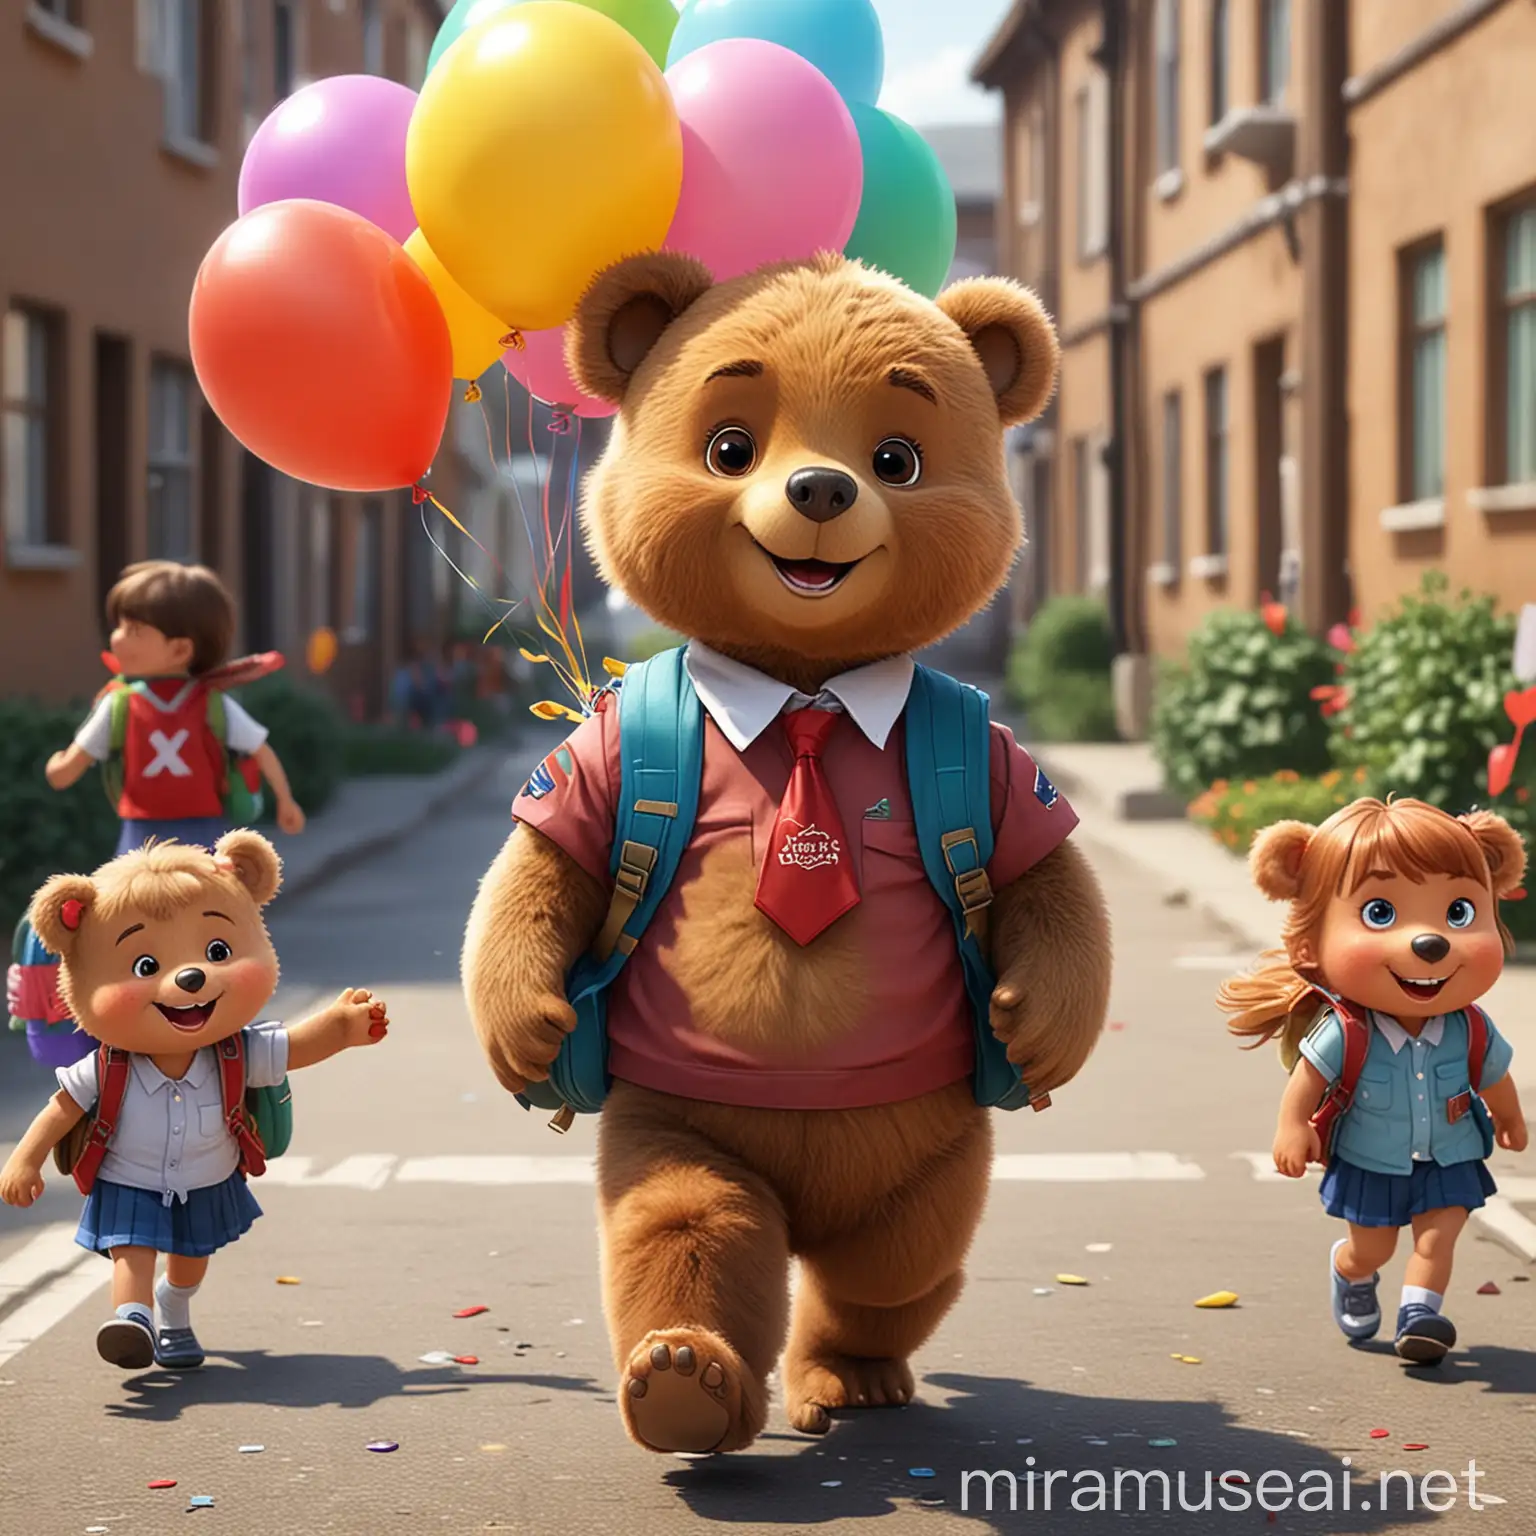 Adorable Brown Bear and Friends Heading to School with Colorful Balloons